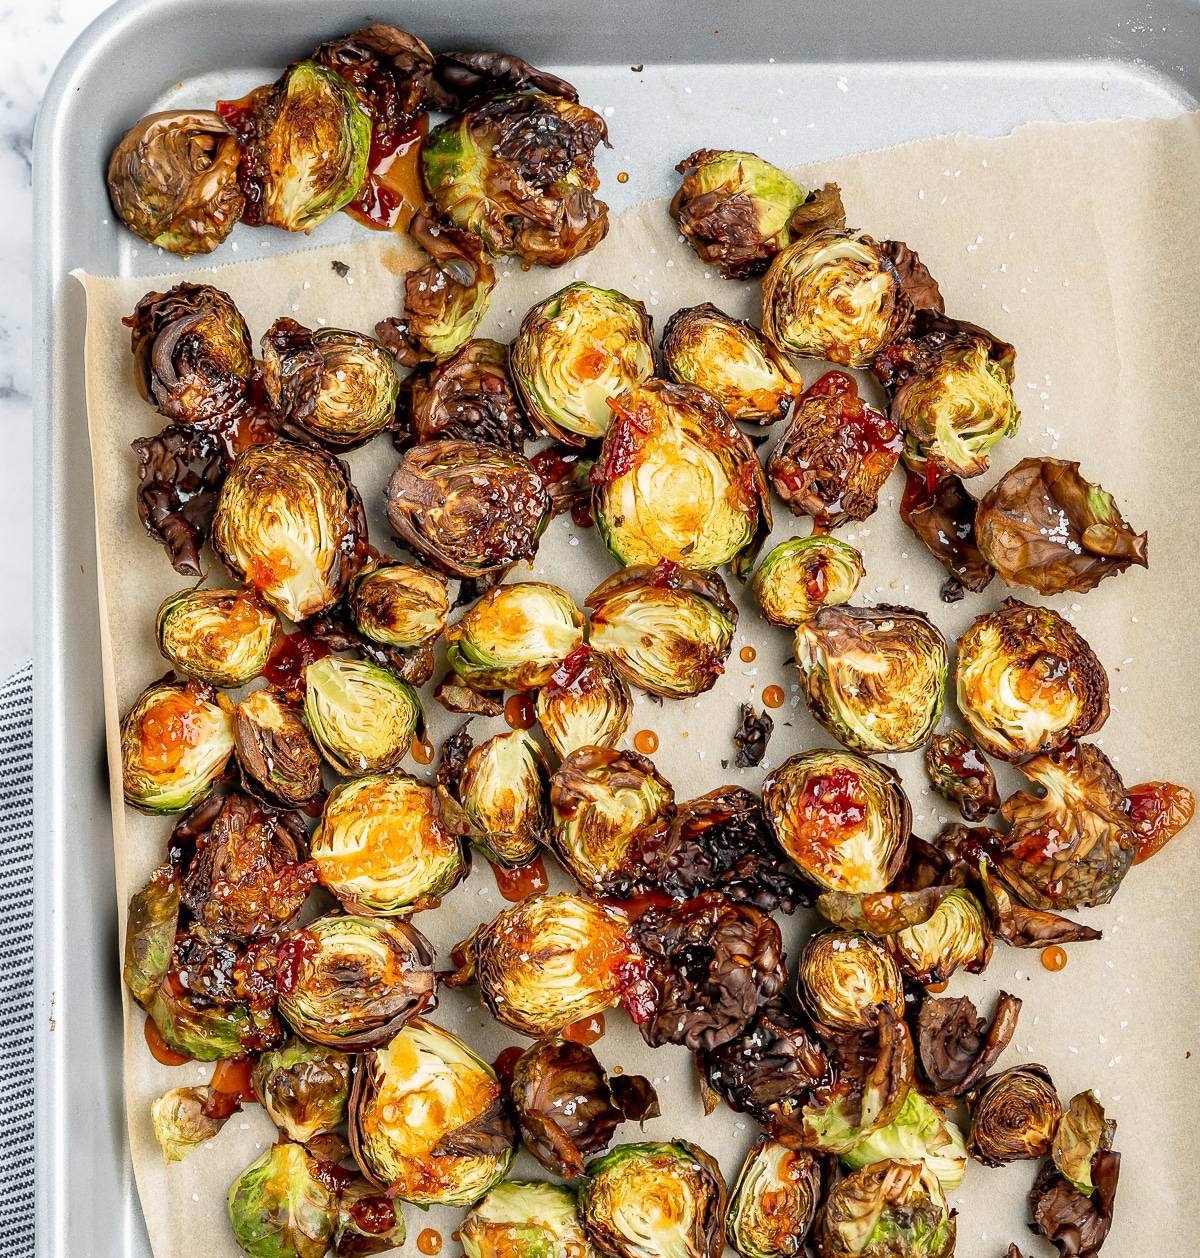 Longhorn brussel sprouts on a sheet tray.